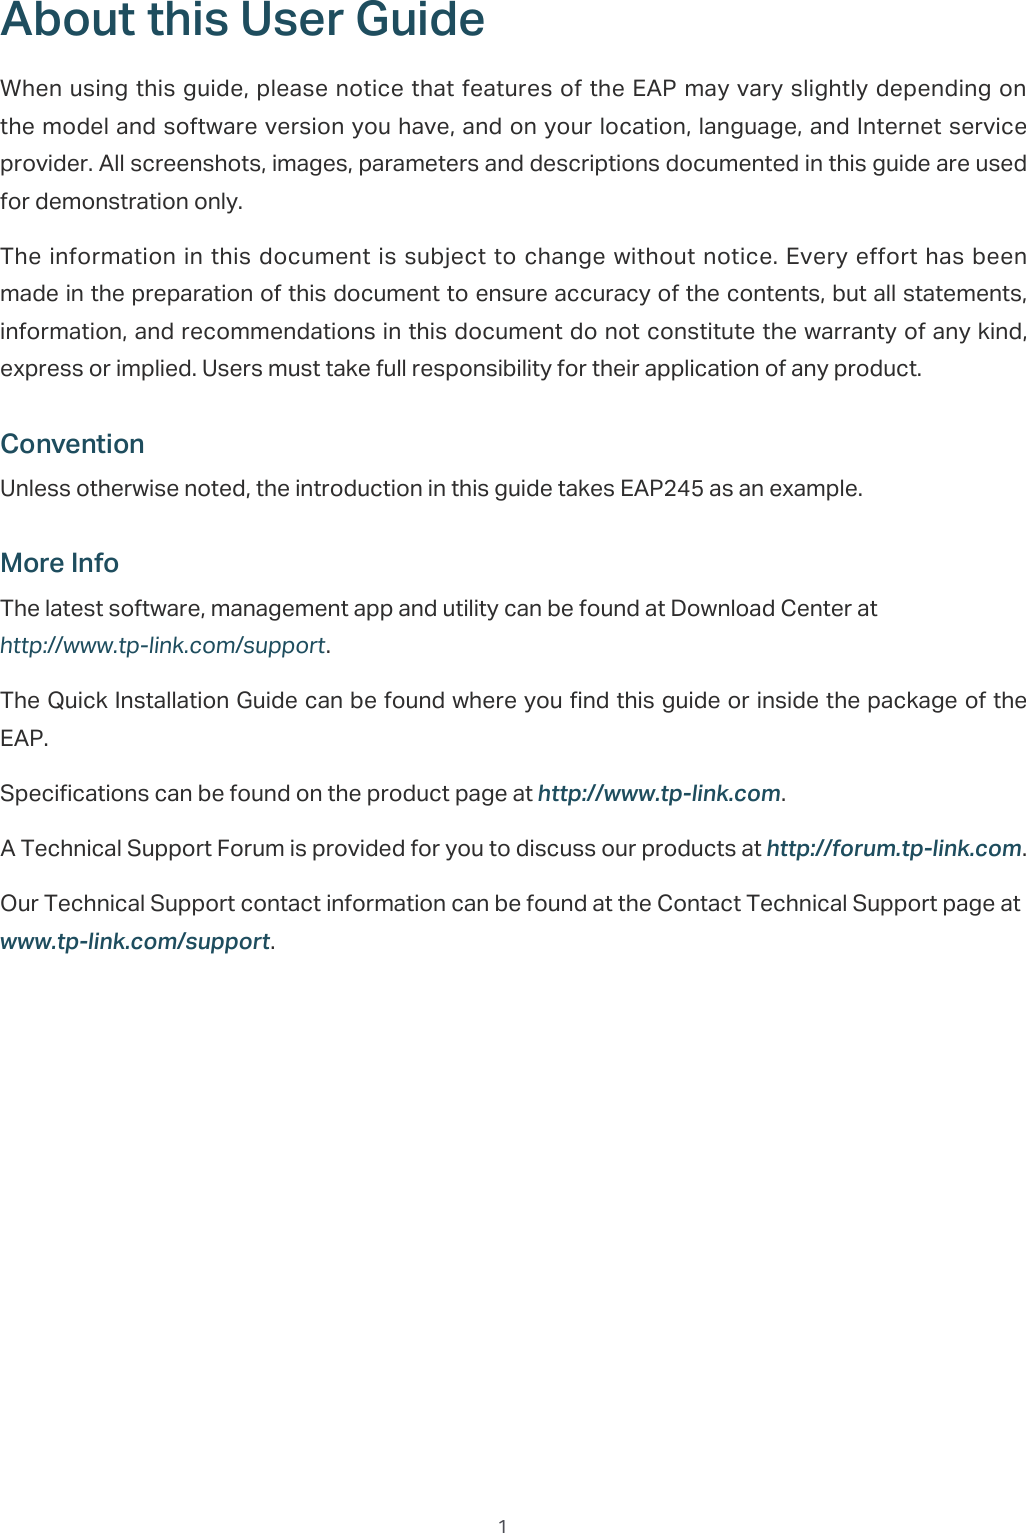  1About this User GuideWhen using this guide, please notice that features of the EAP may vary slightly depending on the model and software version you have, and on your location, language, and Internet service provider. All screenshots, images, parameters and descriptions documented in this guide are used for demonstration only.The information in this document is subject to change without notice. Every effort has  been made in the preparation of this document to ensure accuracy of the contents, but all statements, information, and recommendations in this document do not constitute the warranty of any kind, express or implied. Users must take full responsibility for their application of any product.ConventionUnless otherwise noted, the introduction in this guide takes EAP245 as an example.More InfoThe latest software, management app and utility can be found at Download Center at http://www.tp-link.com/support.The Quick Installation Guide can be found where you find this guide or inside the package of the EAP.Specifications can be found on the product page at KWWSZZZWSOLQNFRP.A Technical Support Forum is provided for you to discuss our products at KWWSIRUXPWSOLQNFRP.Our Technical Support contact information can be found at the Contact Technical Support page at ZZZWSOLQNFRPVXSSRUW.